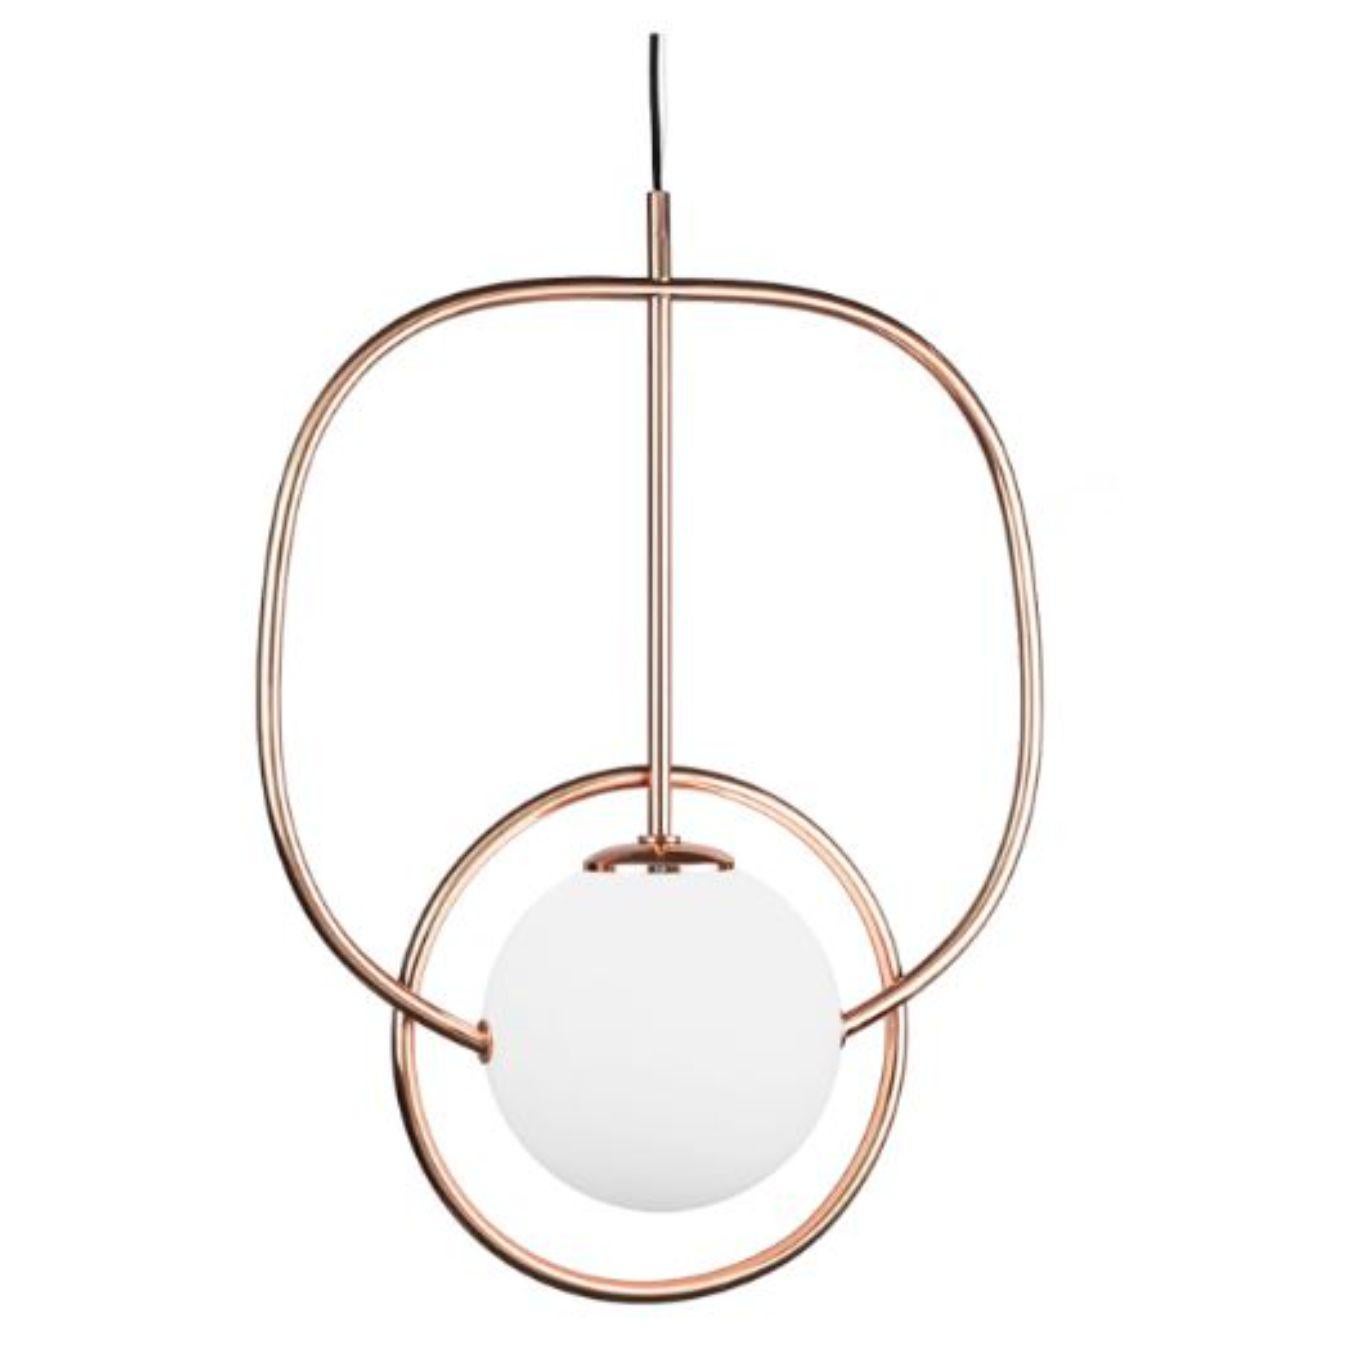 Copper loop suspension lamp by Dooq
Dimensions: W 55 x D 25 x H 77 cm
Materials: lacquered metal, polished or brushed metal, copper.
Also available in different colours and materials. 

Information:
230V/50Hz
1 x max. G9
4W LED

120V/60Hz
1 x max.